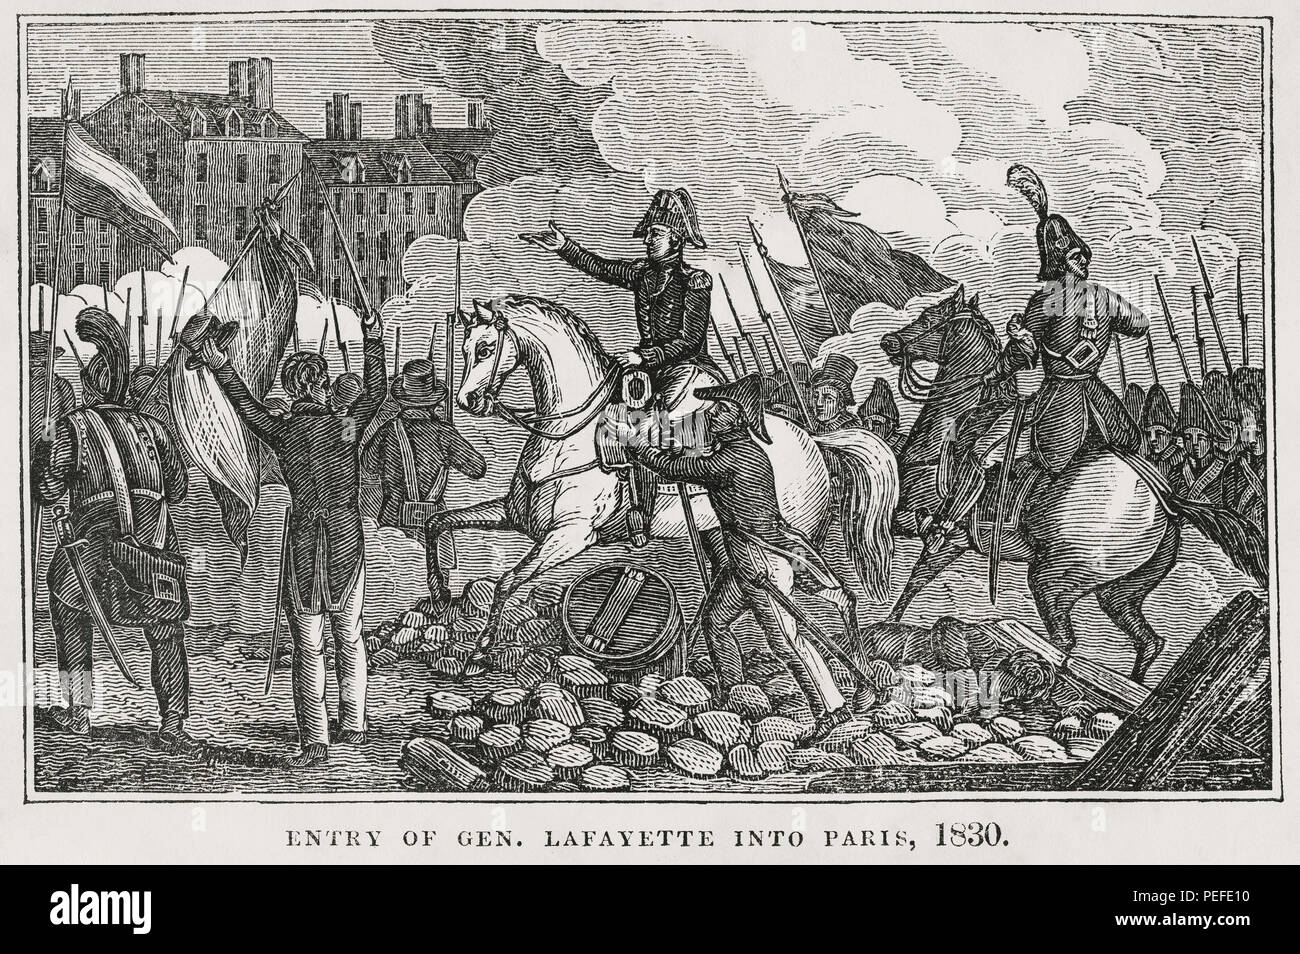 Entry of General Lafayette into Paris, 1830, Illustration from the Book, Historical Cabinet, L.H. Young Publisher, New Haven, 1834 Stock Photo